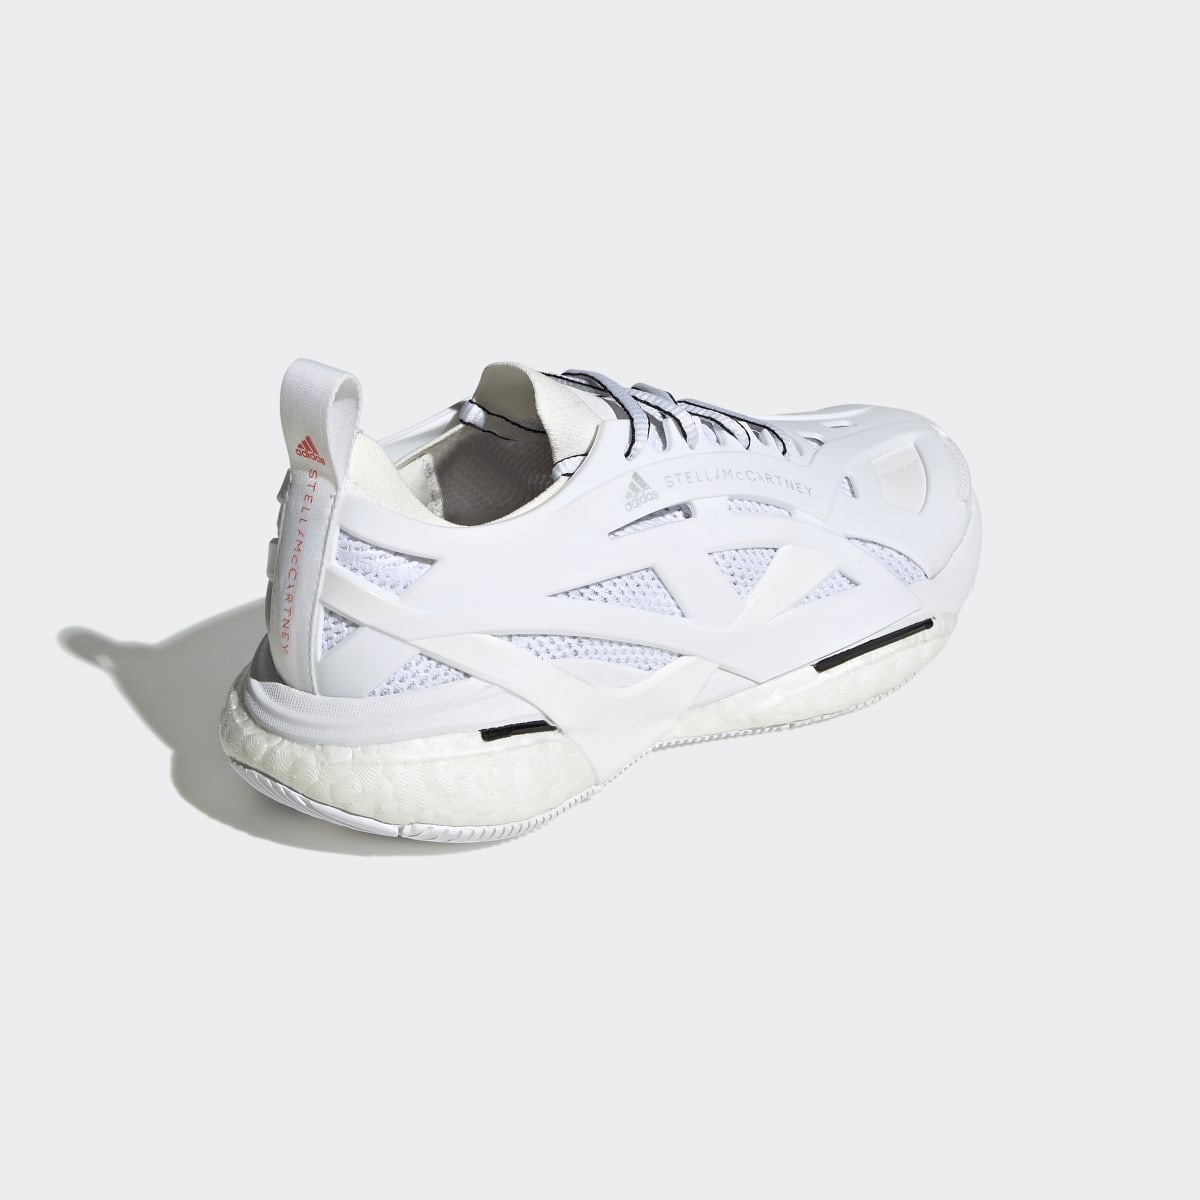 Adidas by Stella McCartney Solarglide Running Shoes. 6